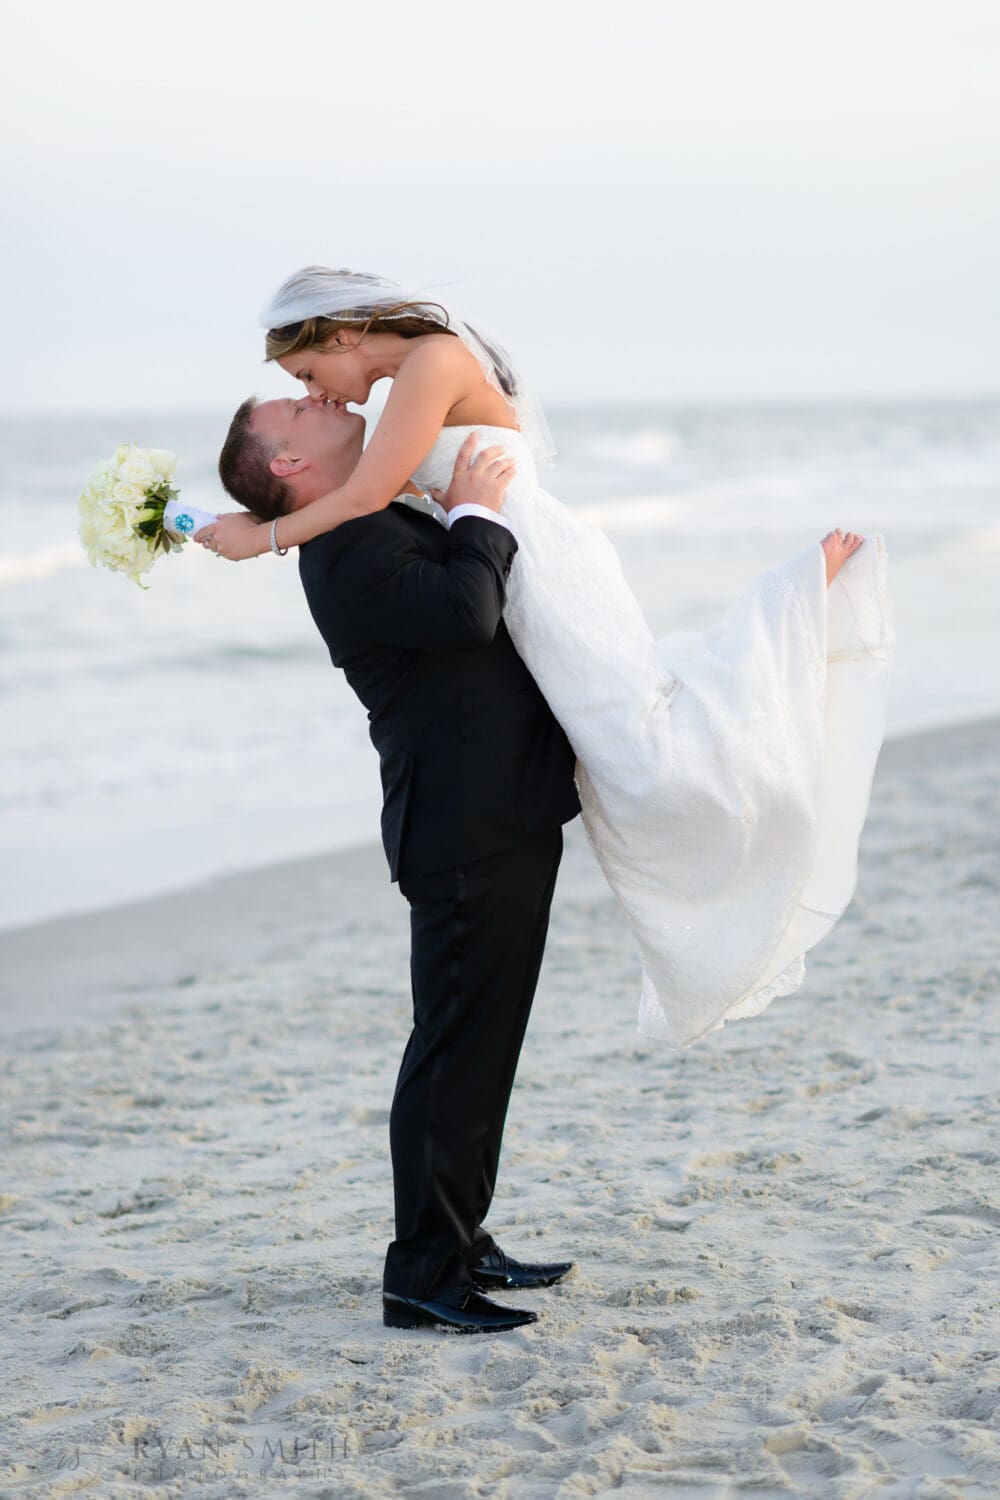 Groom lifting bride off the ground for a kiss - Ocean Club, Grande Dunes